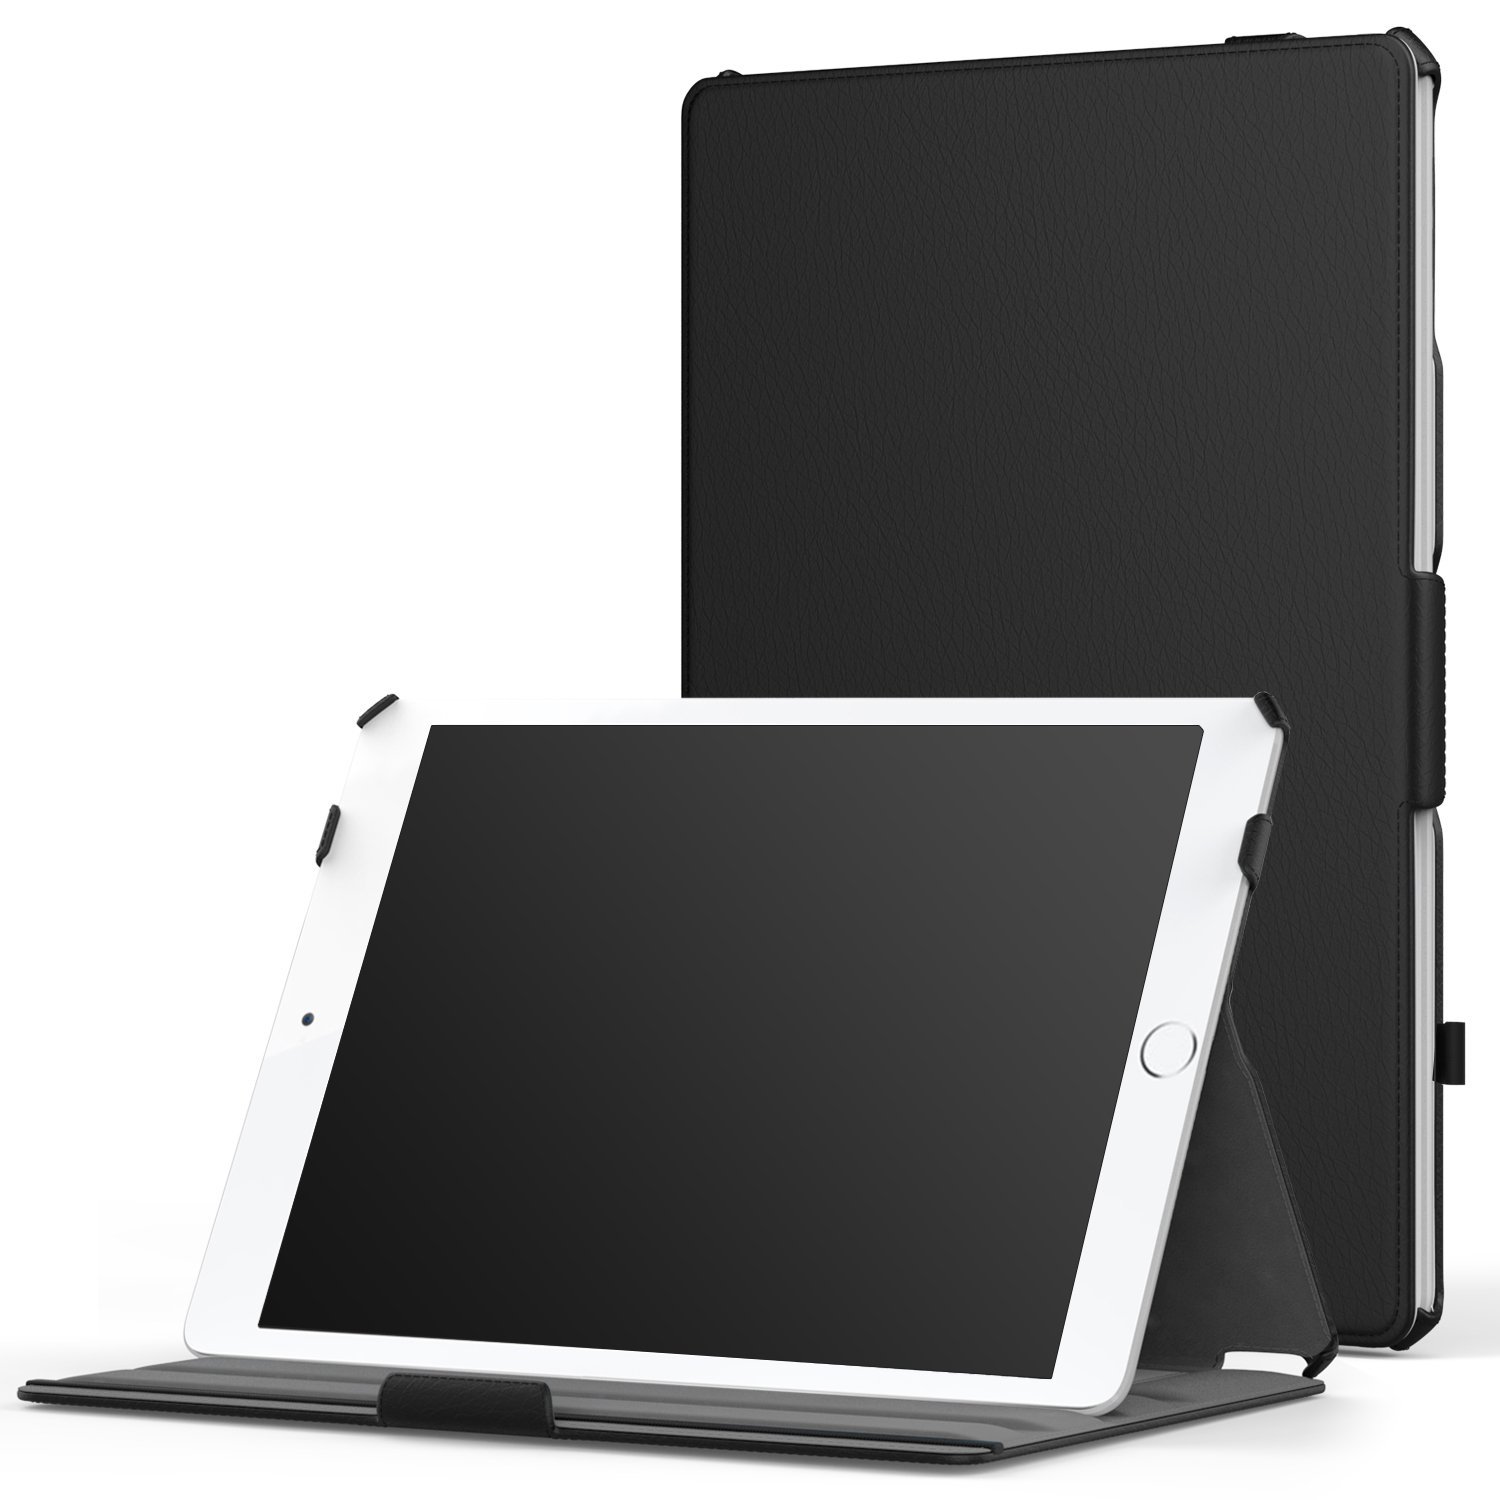 Top 10 Best Apple iPad Pro Case Covers in 2022 Reviews